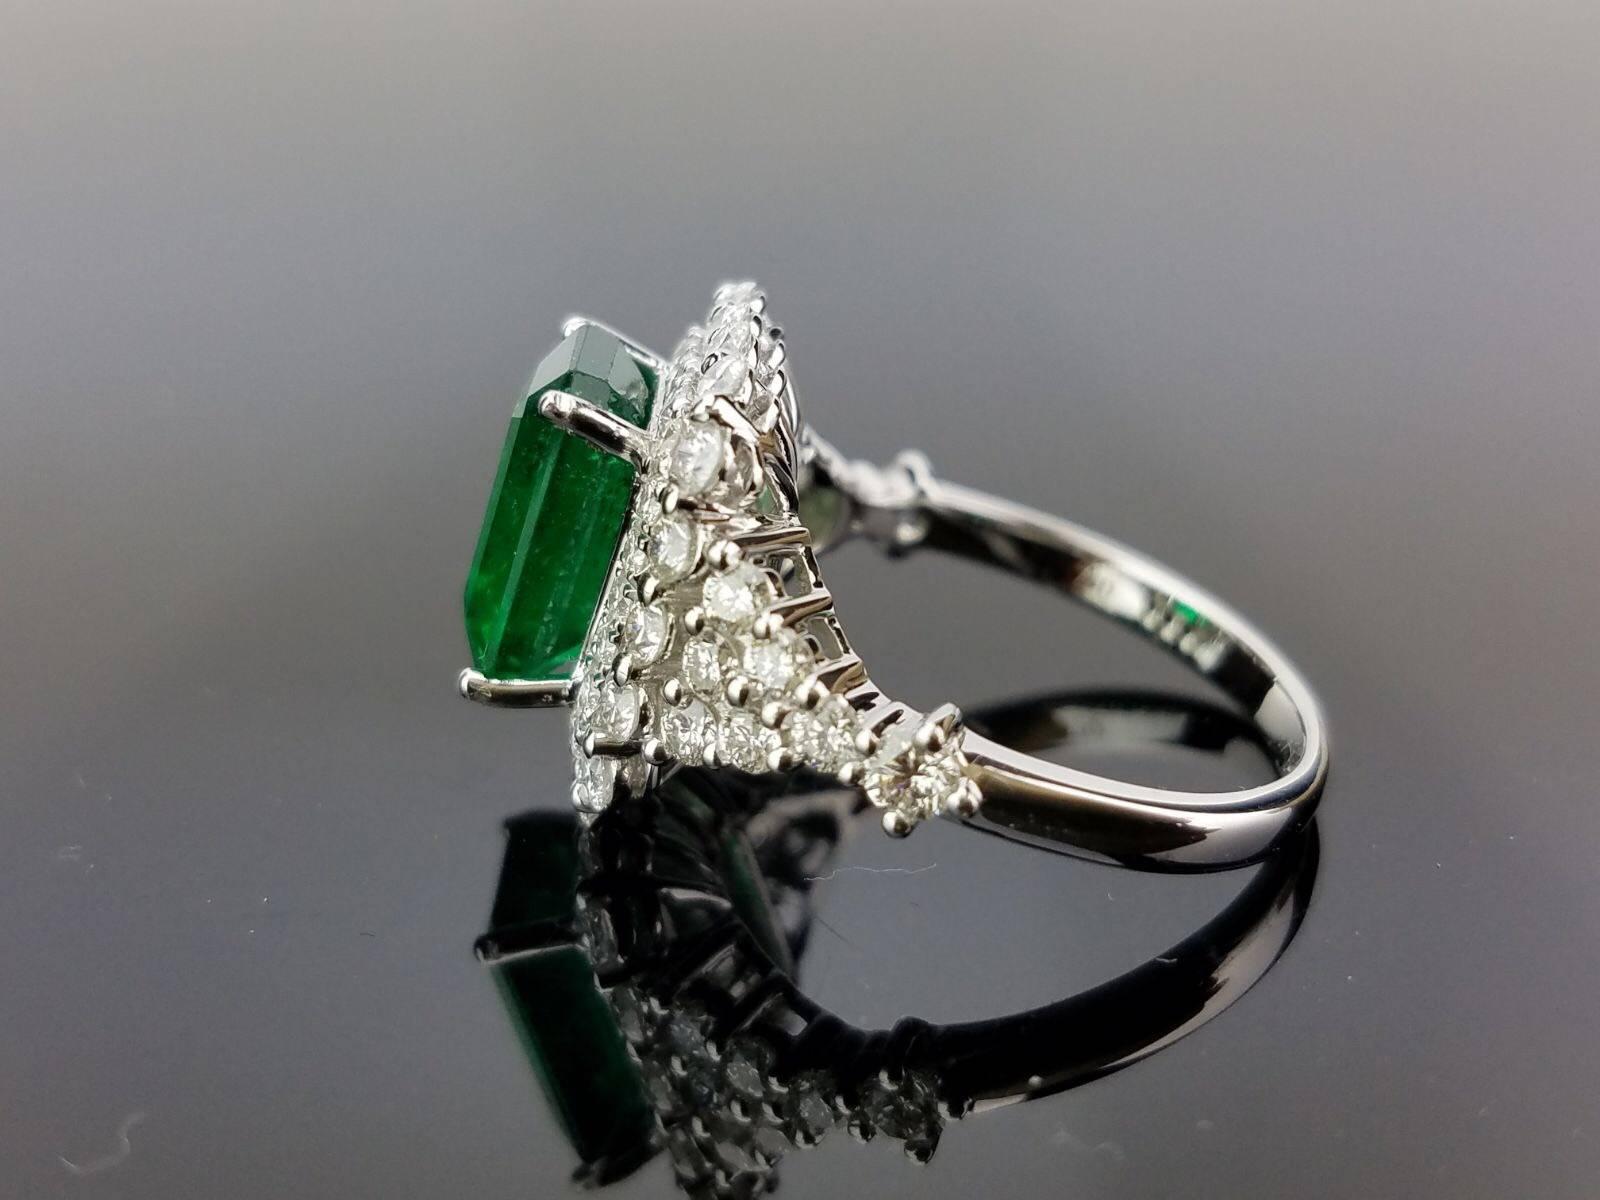 Emerald Cut 2.97 carat Emerald and Diamond Cocktail Ring For Sale